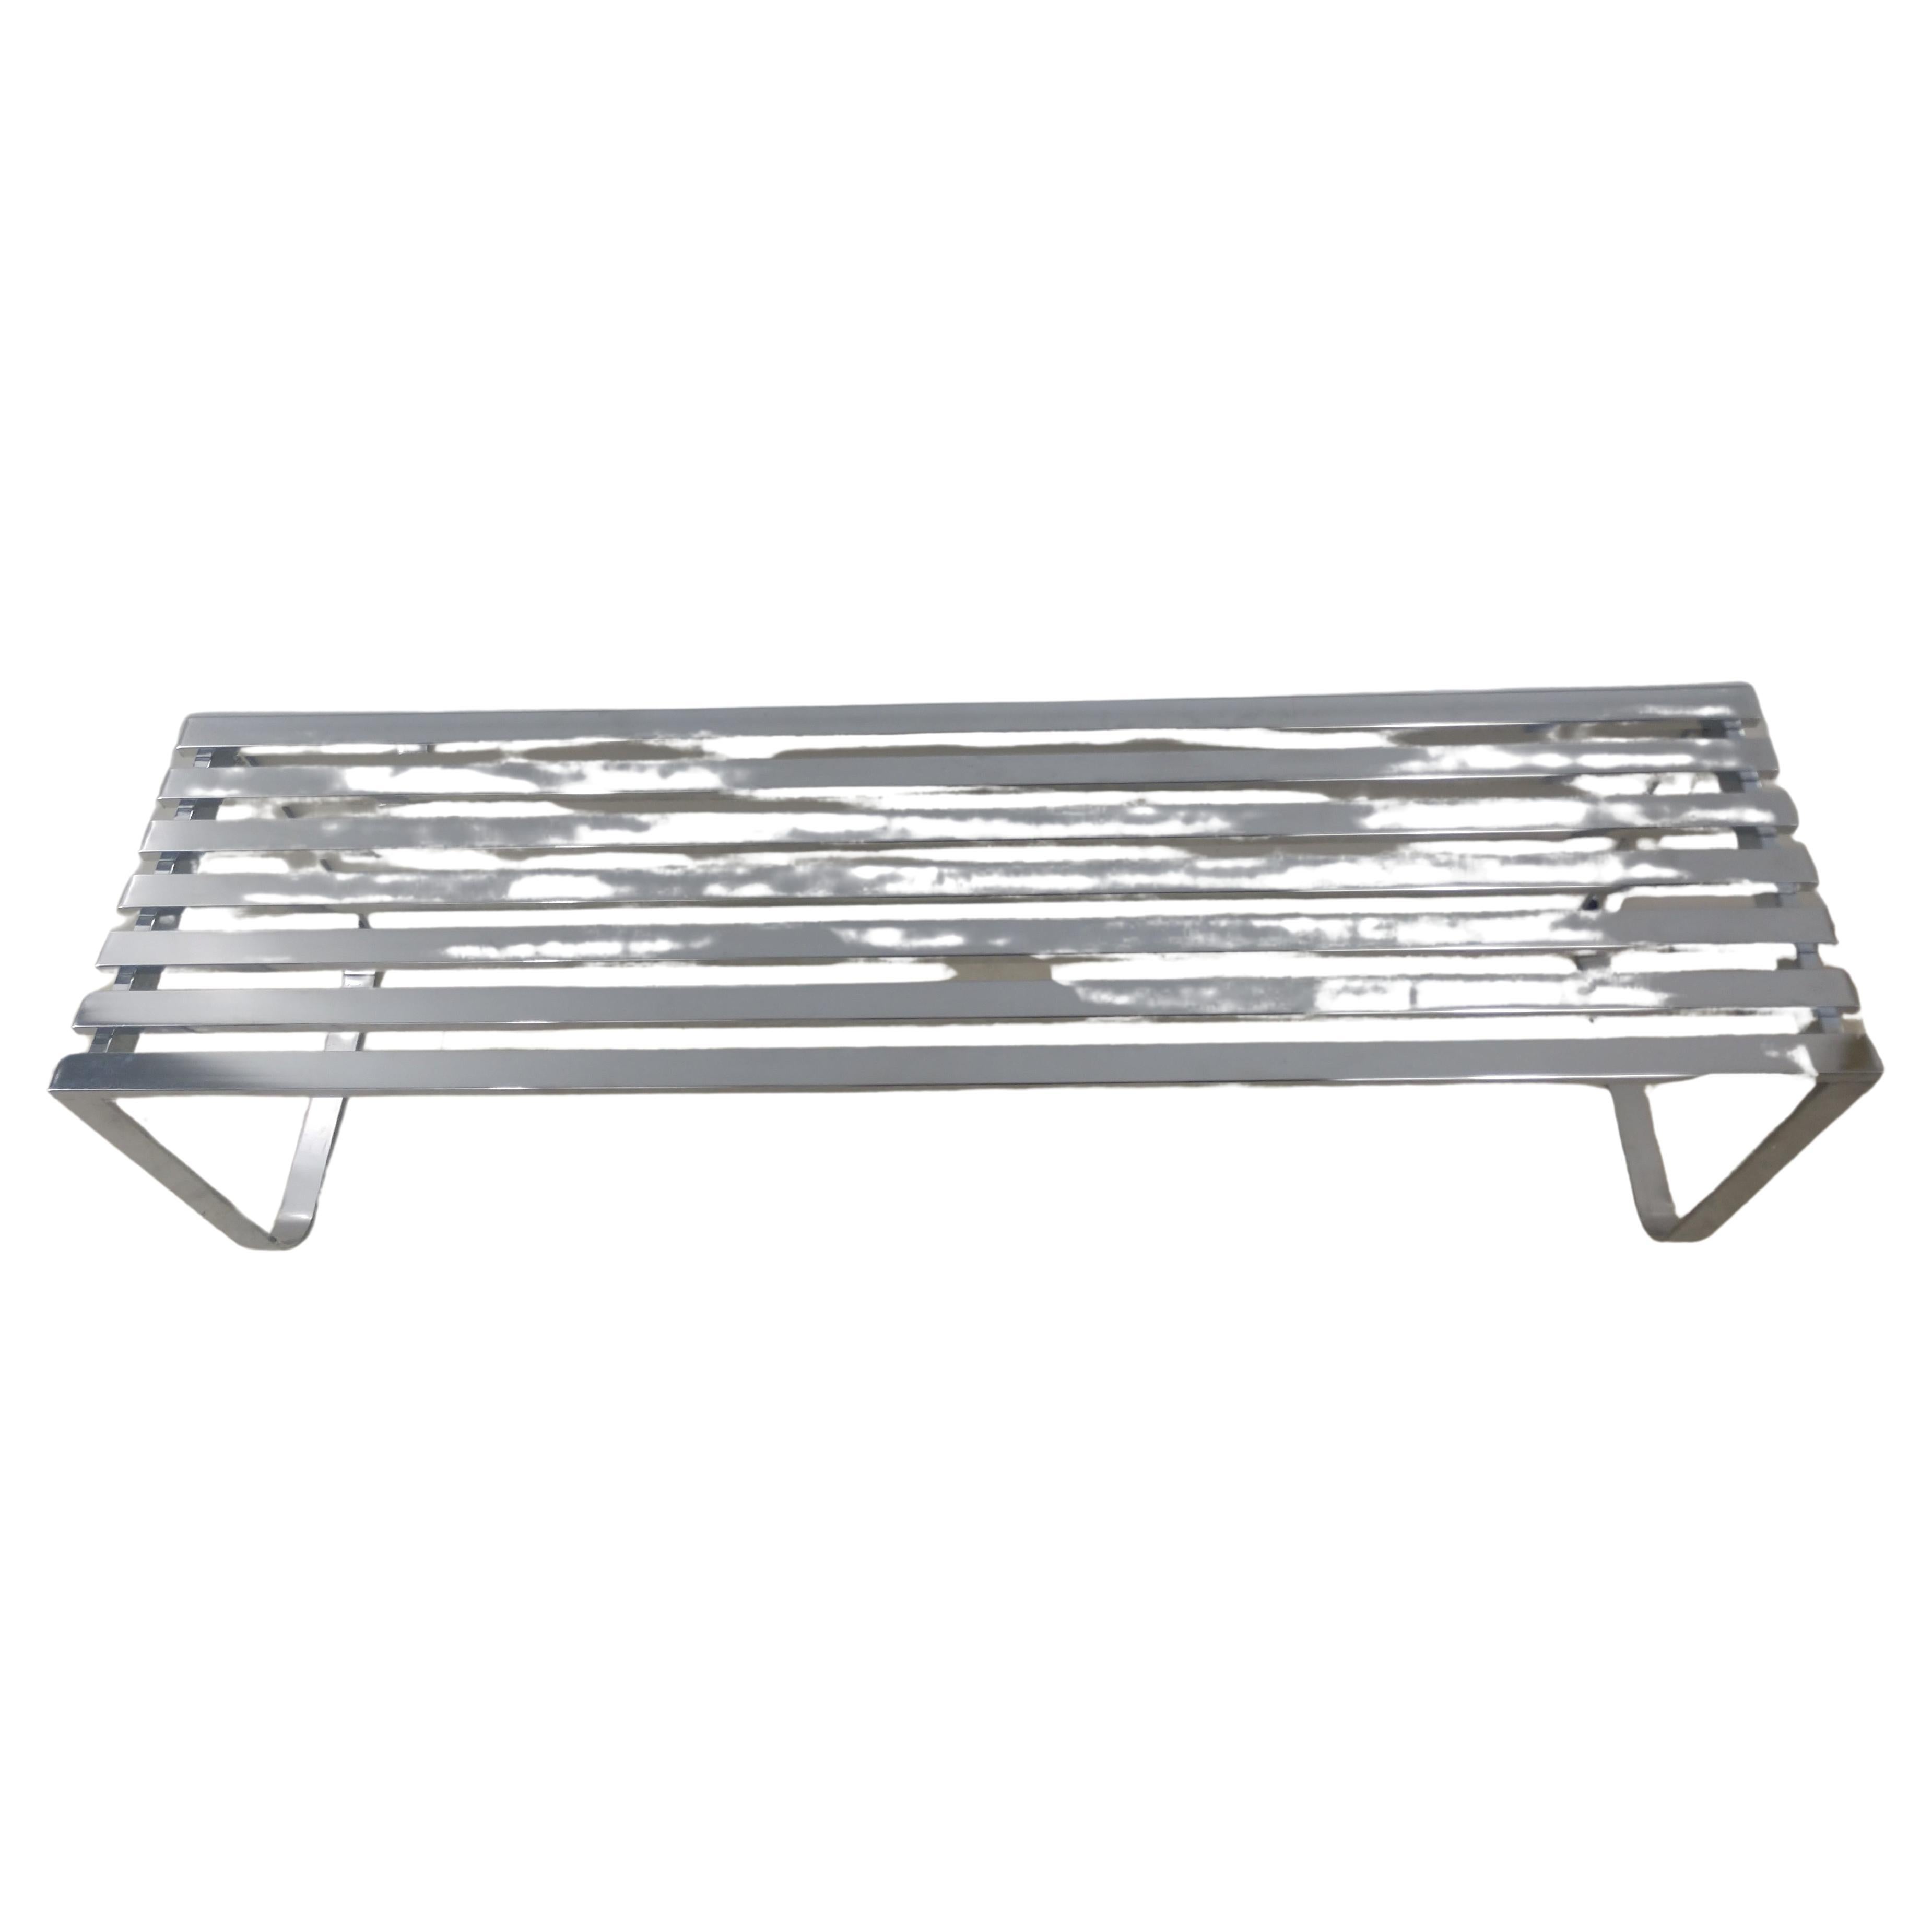 Simple and elegant nickel chrome slatted cocktail table and or bench. 5ft long by 16.5 wide provides a bit of glamour to the room. In excellent vintage condition with some minor wear to the slats, no pitting or rust. 